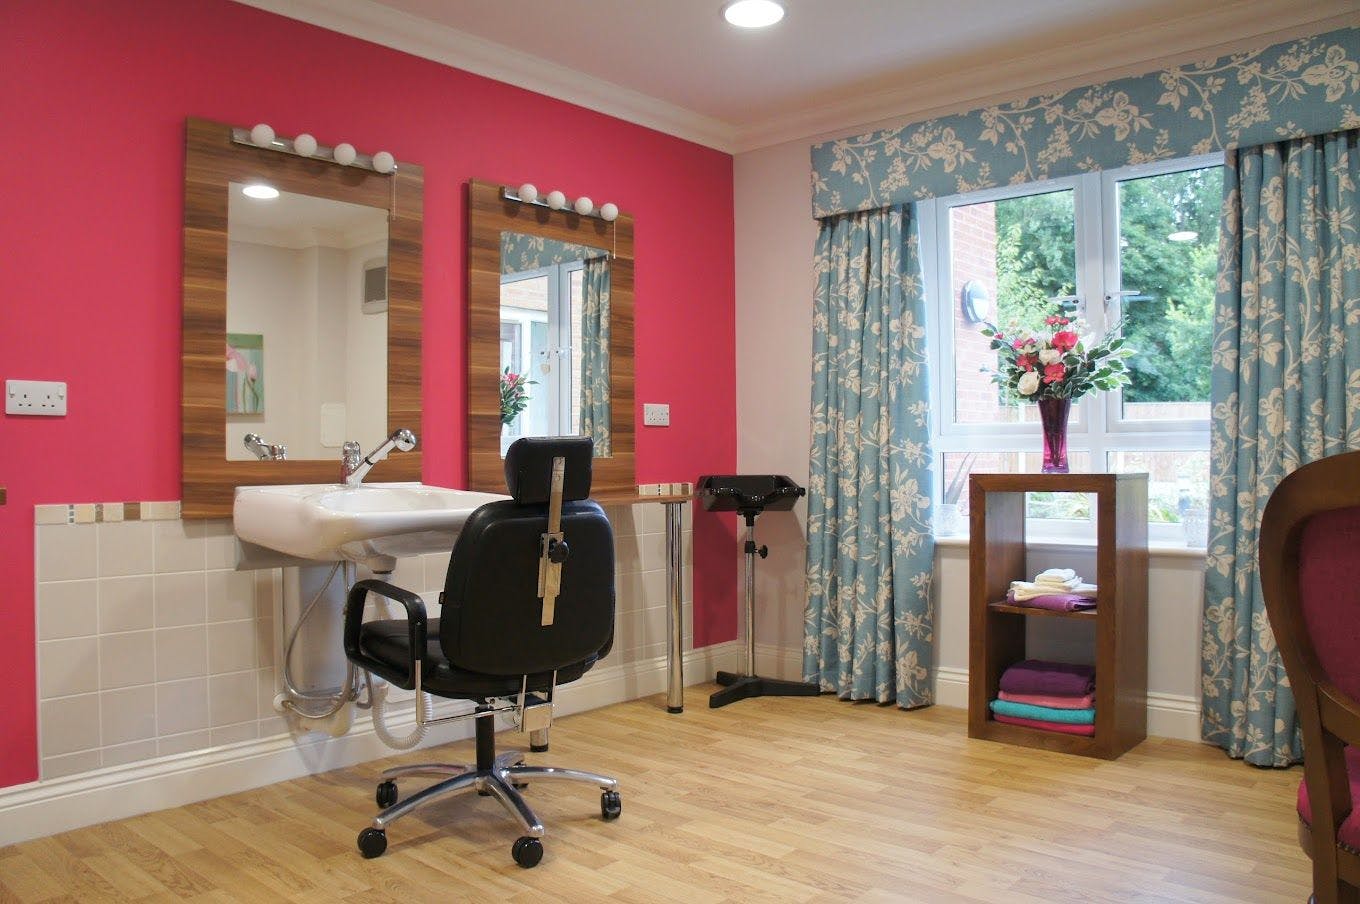 Salon at Sutton Grange Care Home in Southport, Merseyside